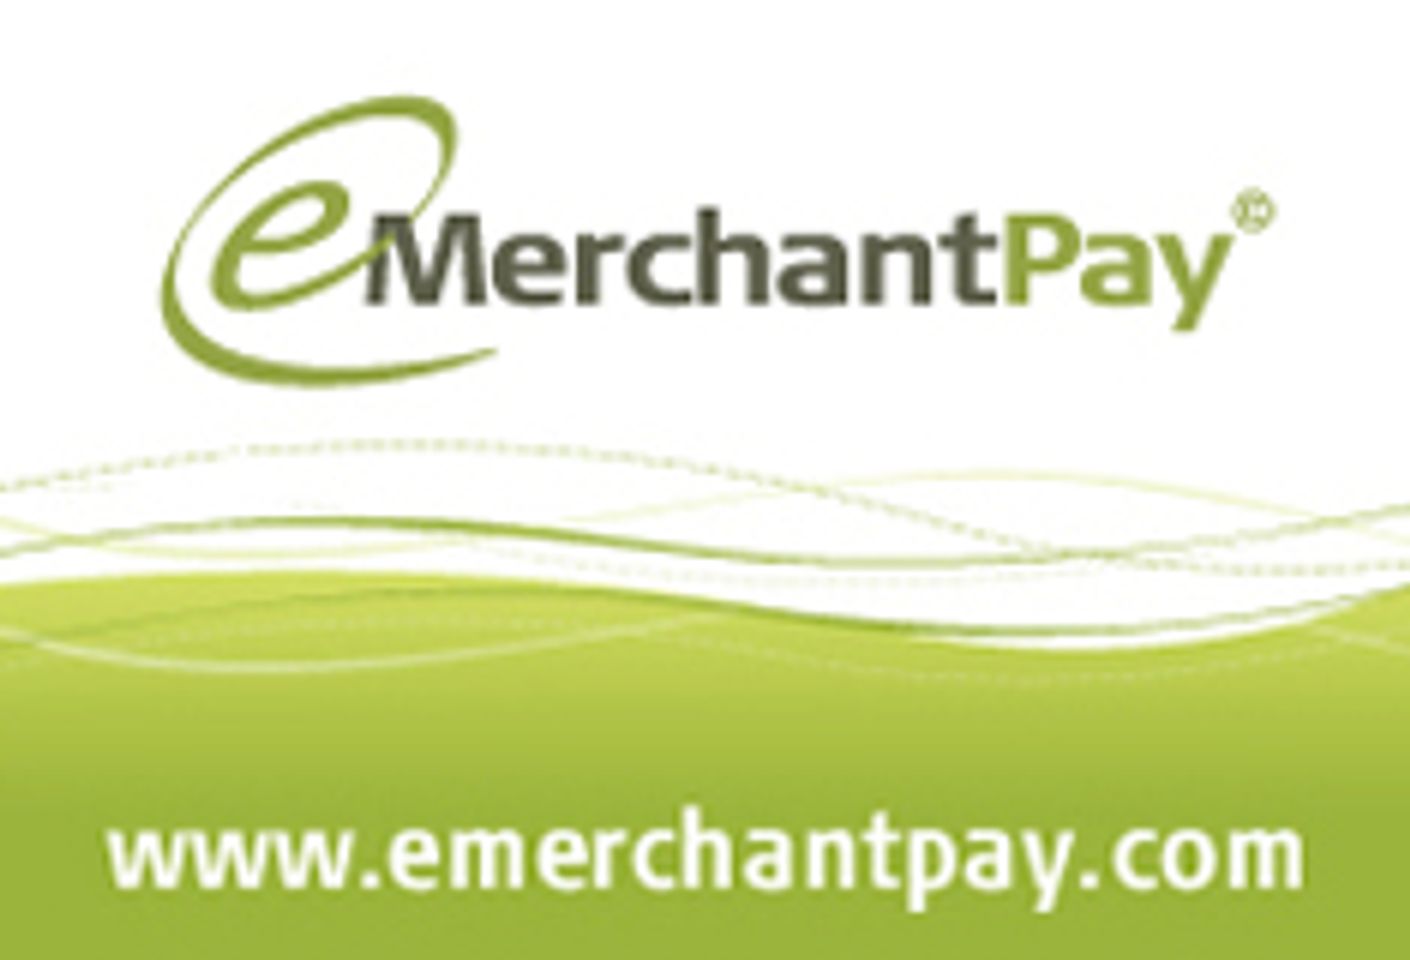 eMerchantPay Toasts to the Success of Webmaster Access Amsterdam